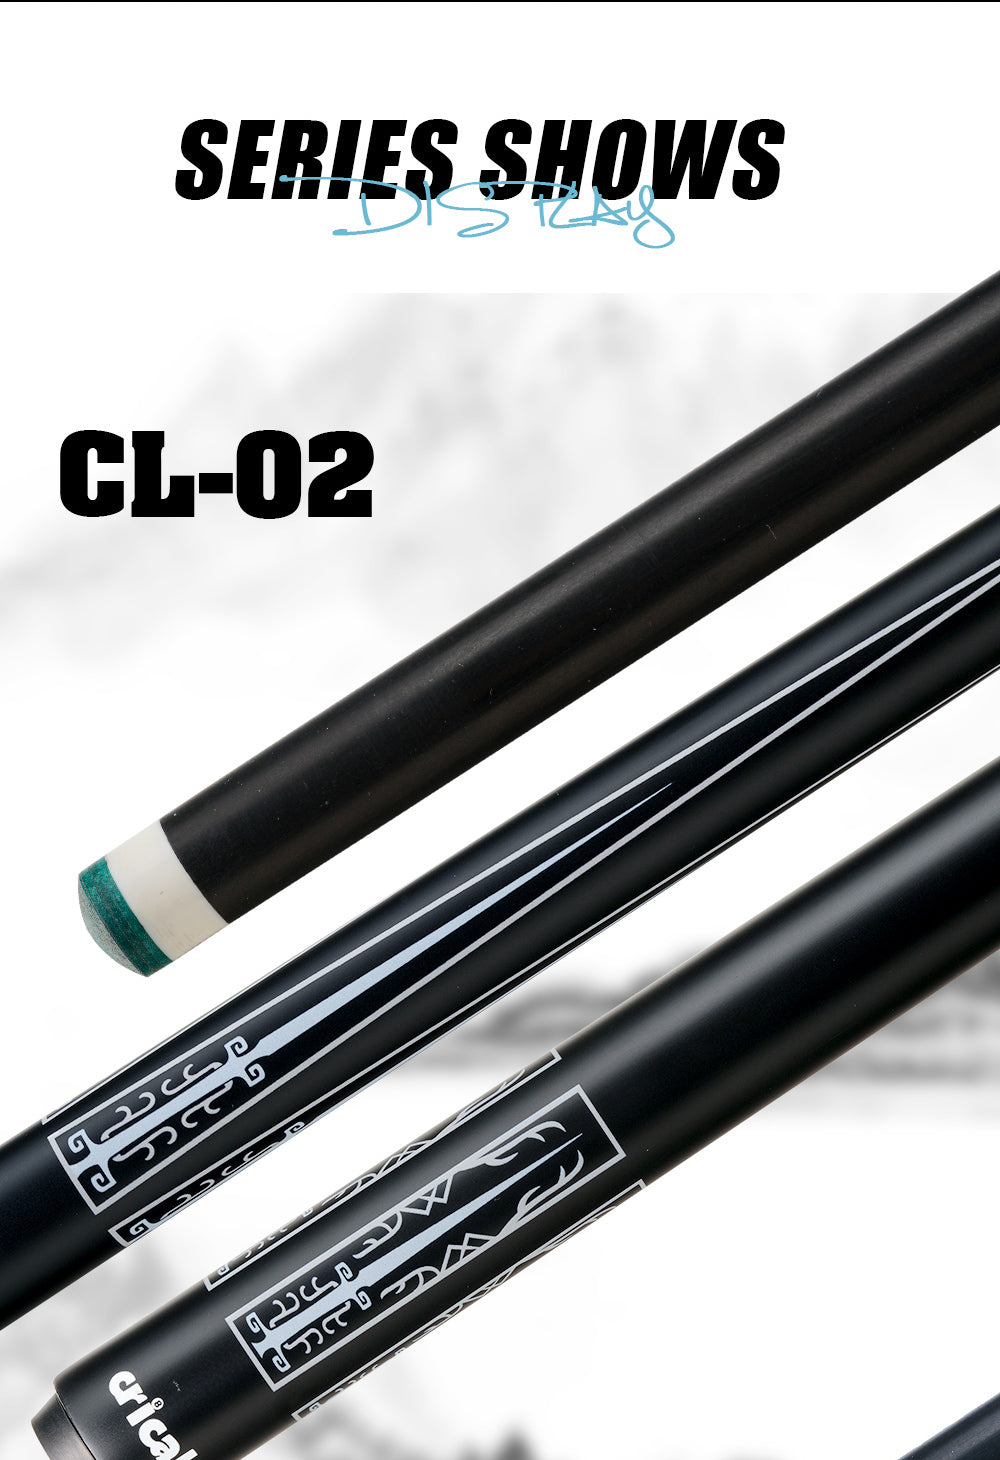 CRICAL CL-02/03 Carbon Fiber Pool Cue Stick Black Technology Low Deflection 12.2mm Tip Radial Joint Professional 1/2 Billiard